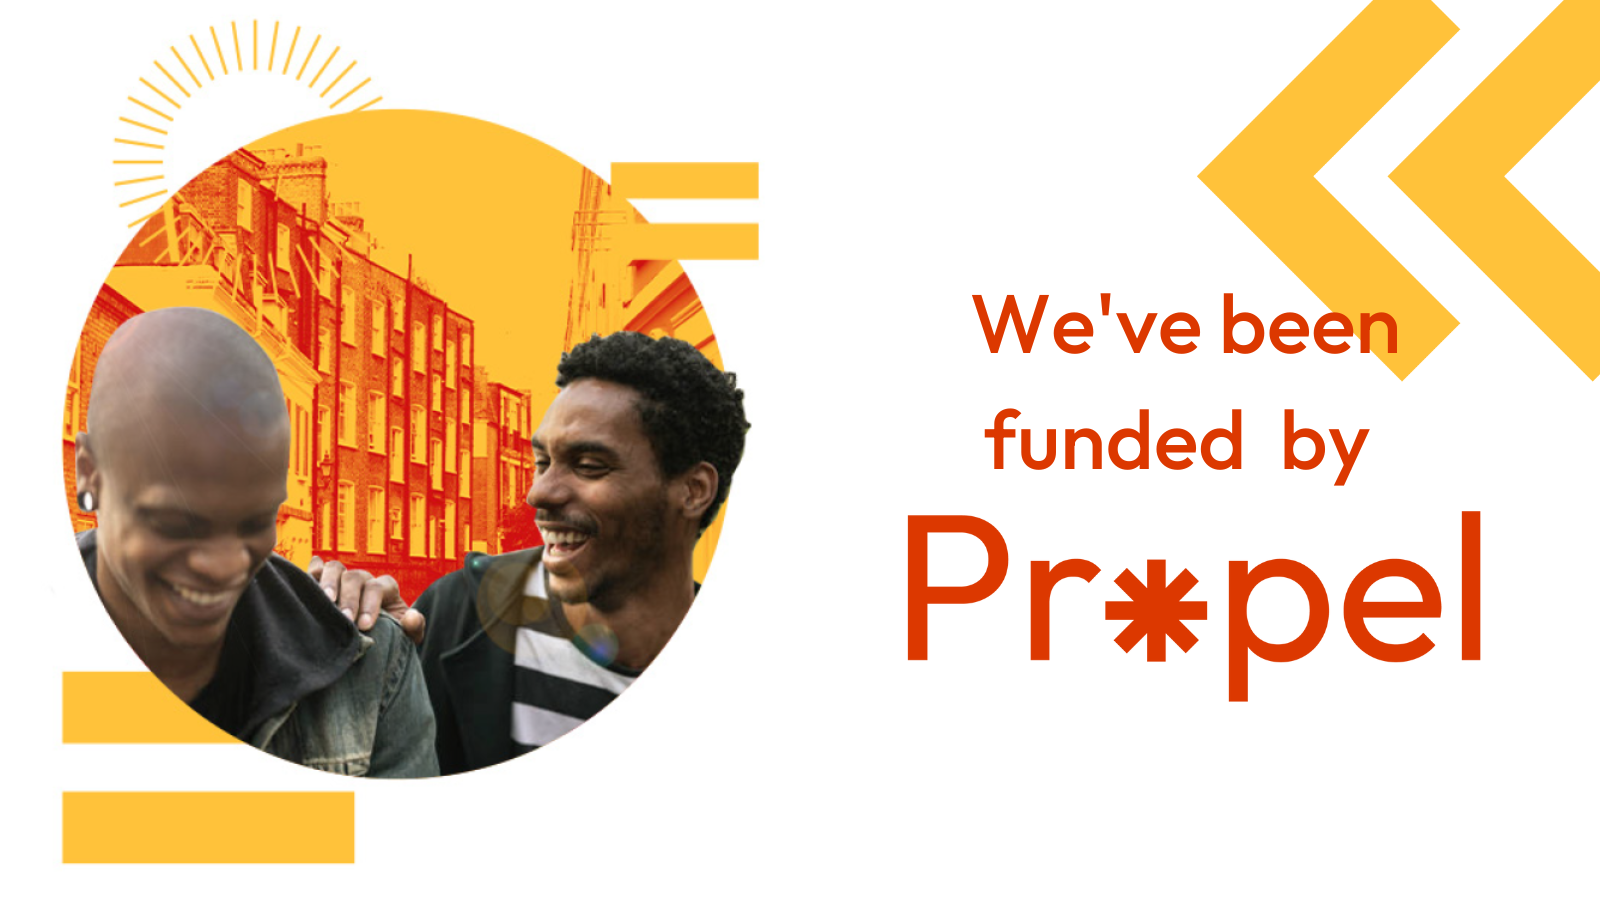 Two men smiling and the headline "we've been funded by Propel"